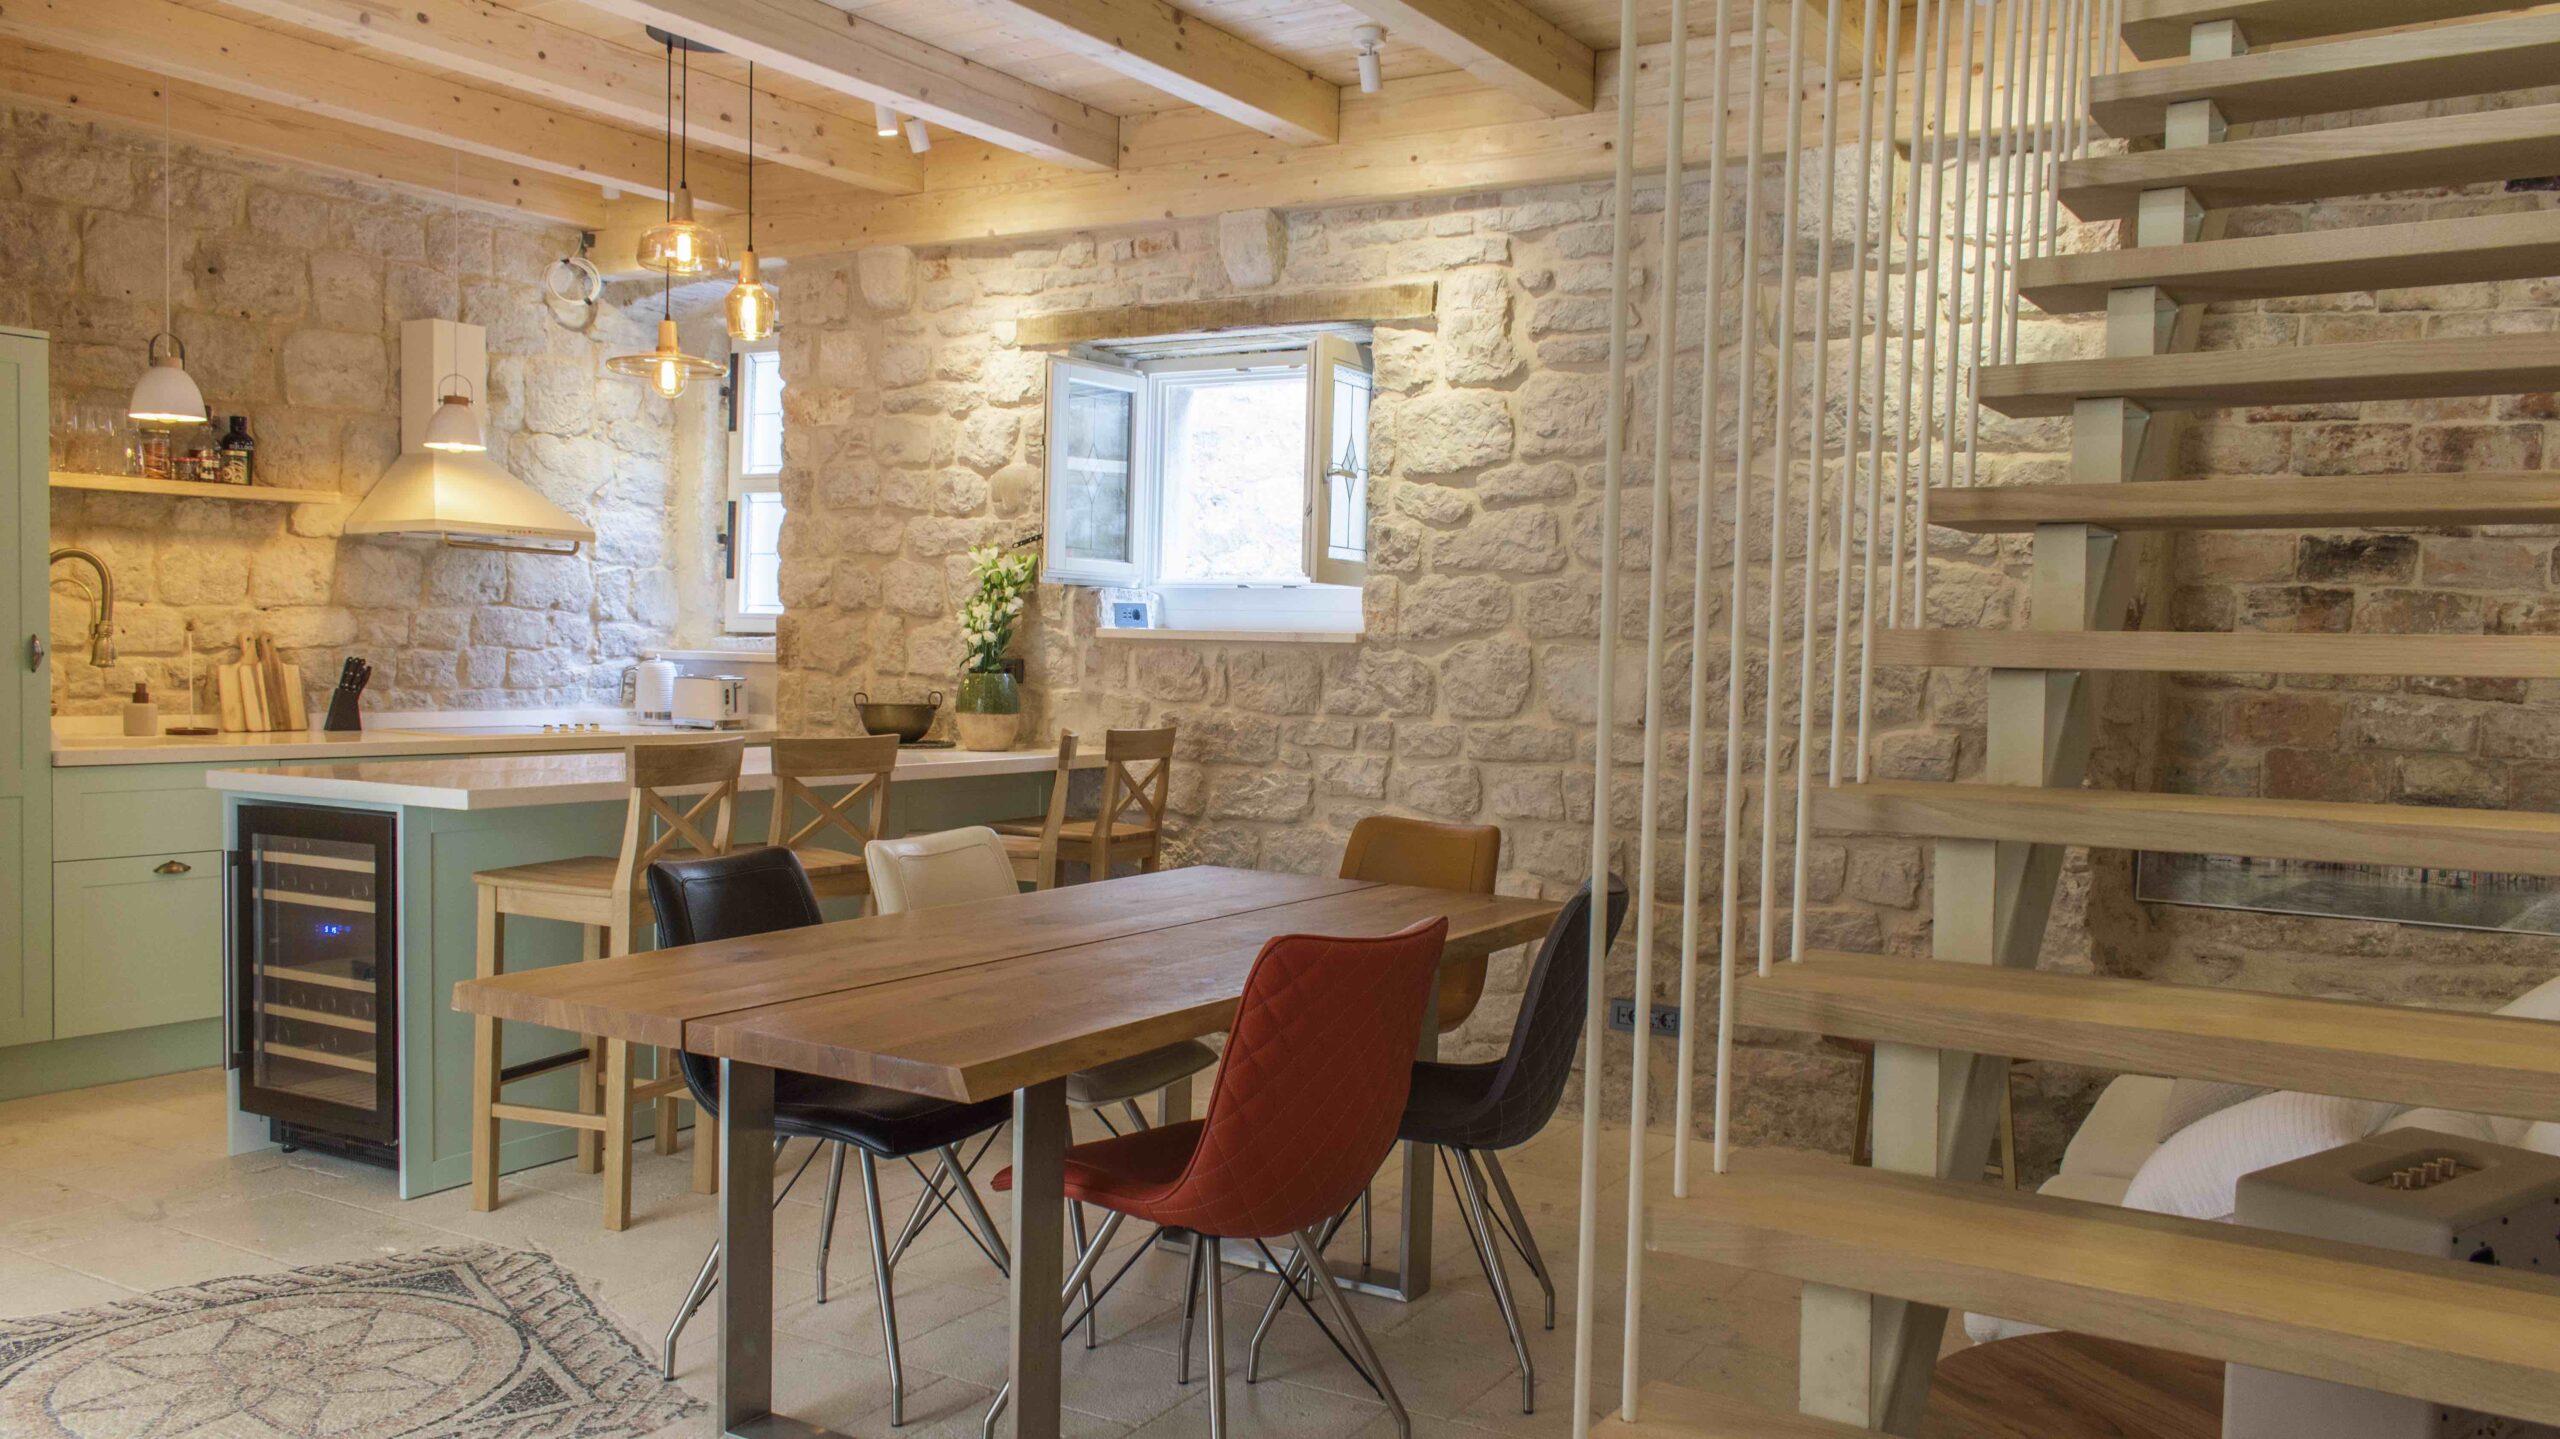 A beautifully refurbished stone house in Stari Grad town centre